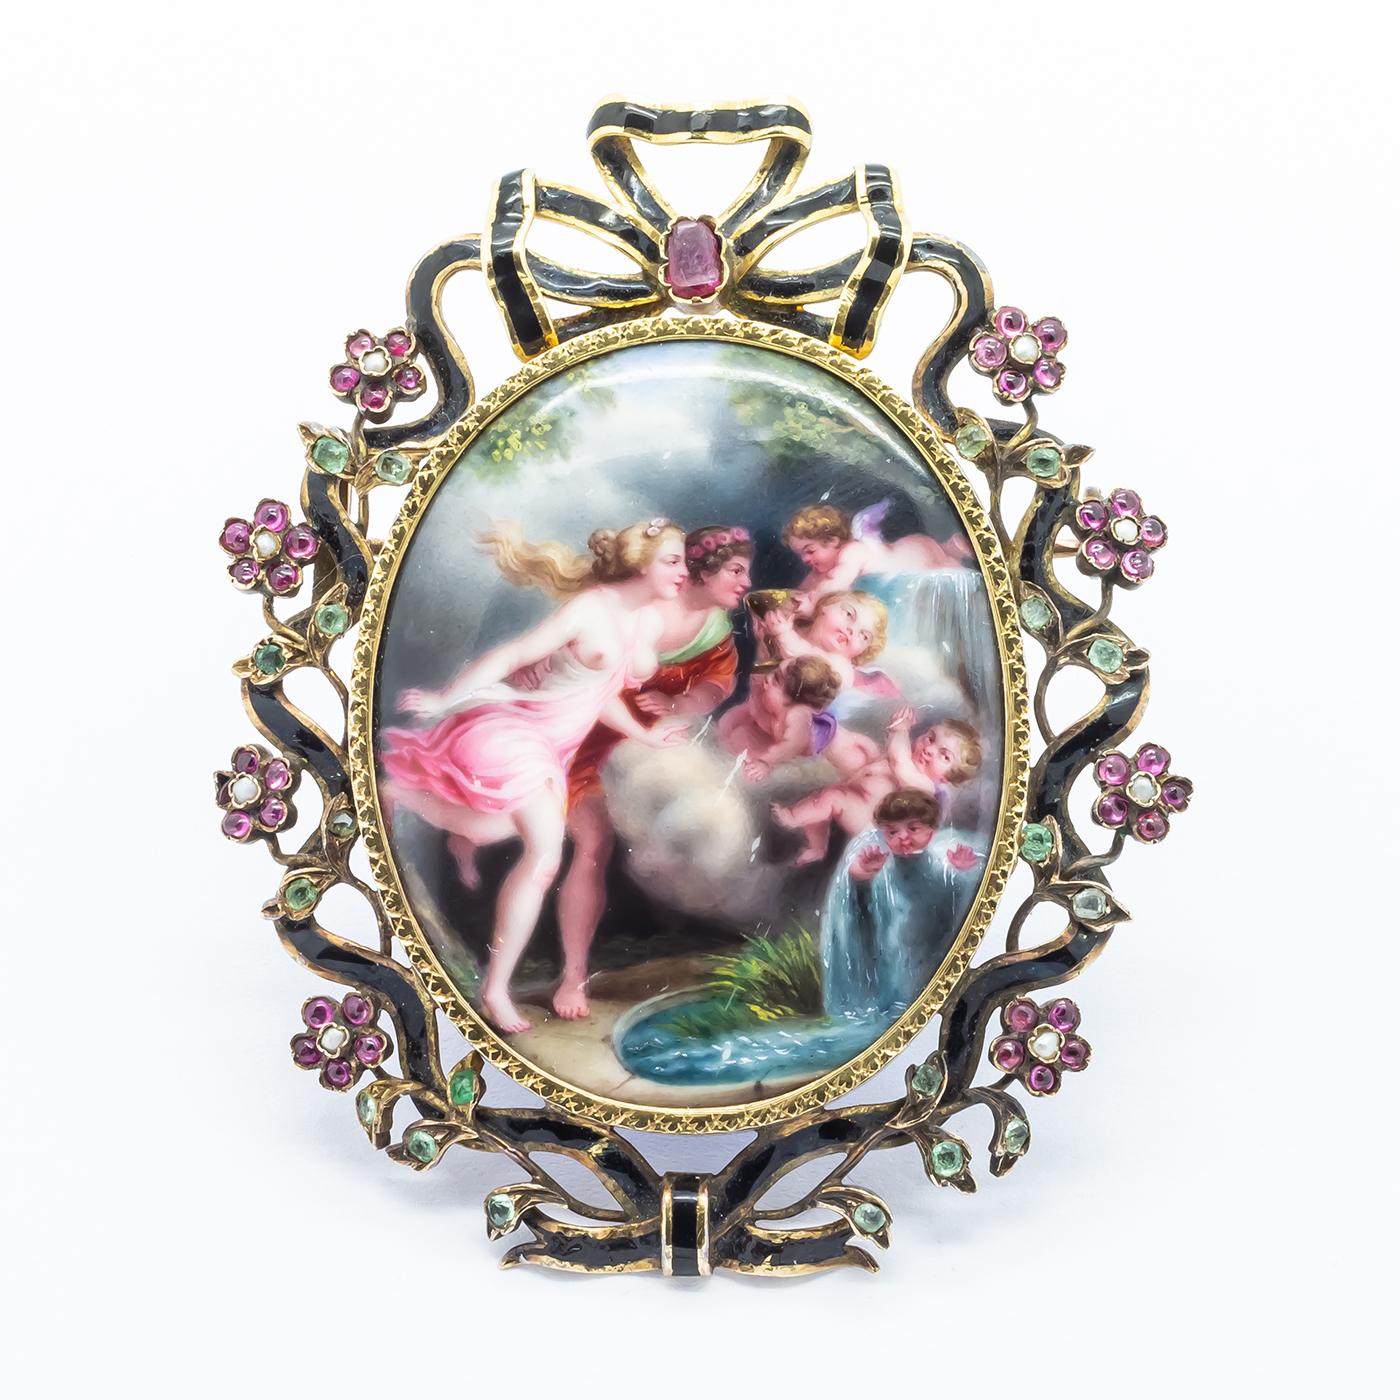 An antique, French, enamelled miniature brooch, portraying a man and a woman with cherubim at a waterfall, surrounded by a black enamelled bow and ribbon, set with a faceted cushion ruby in the bow, with flowers around the ribbon, with natural half